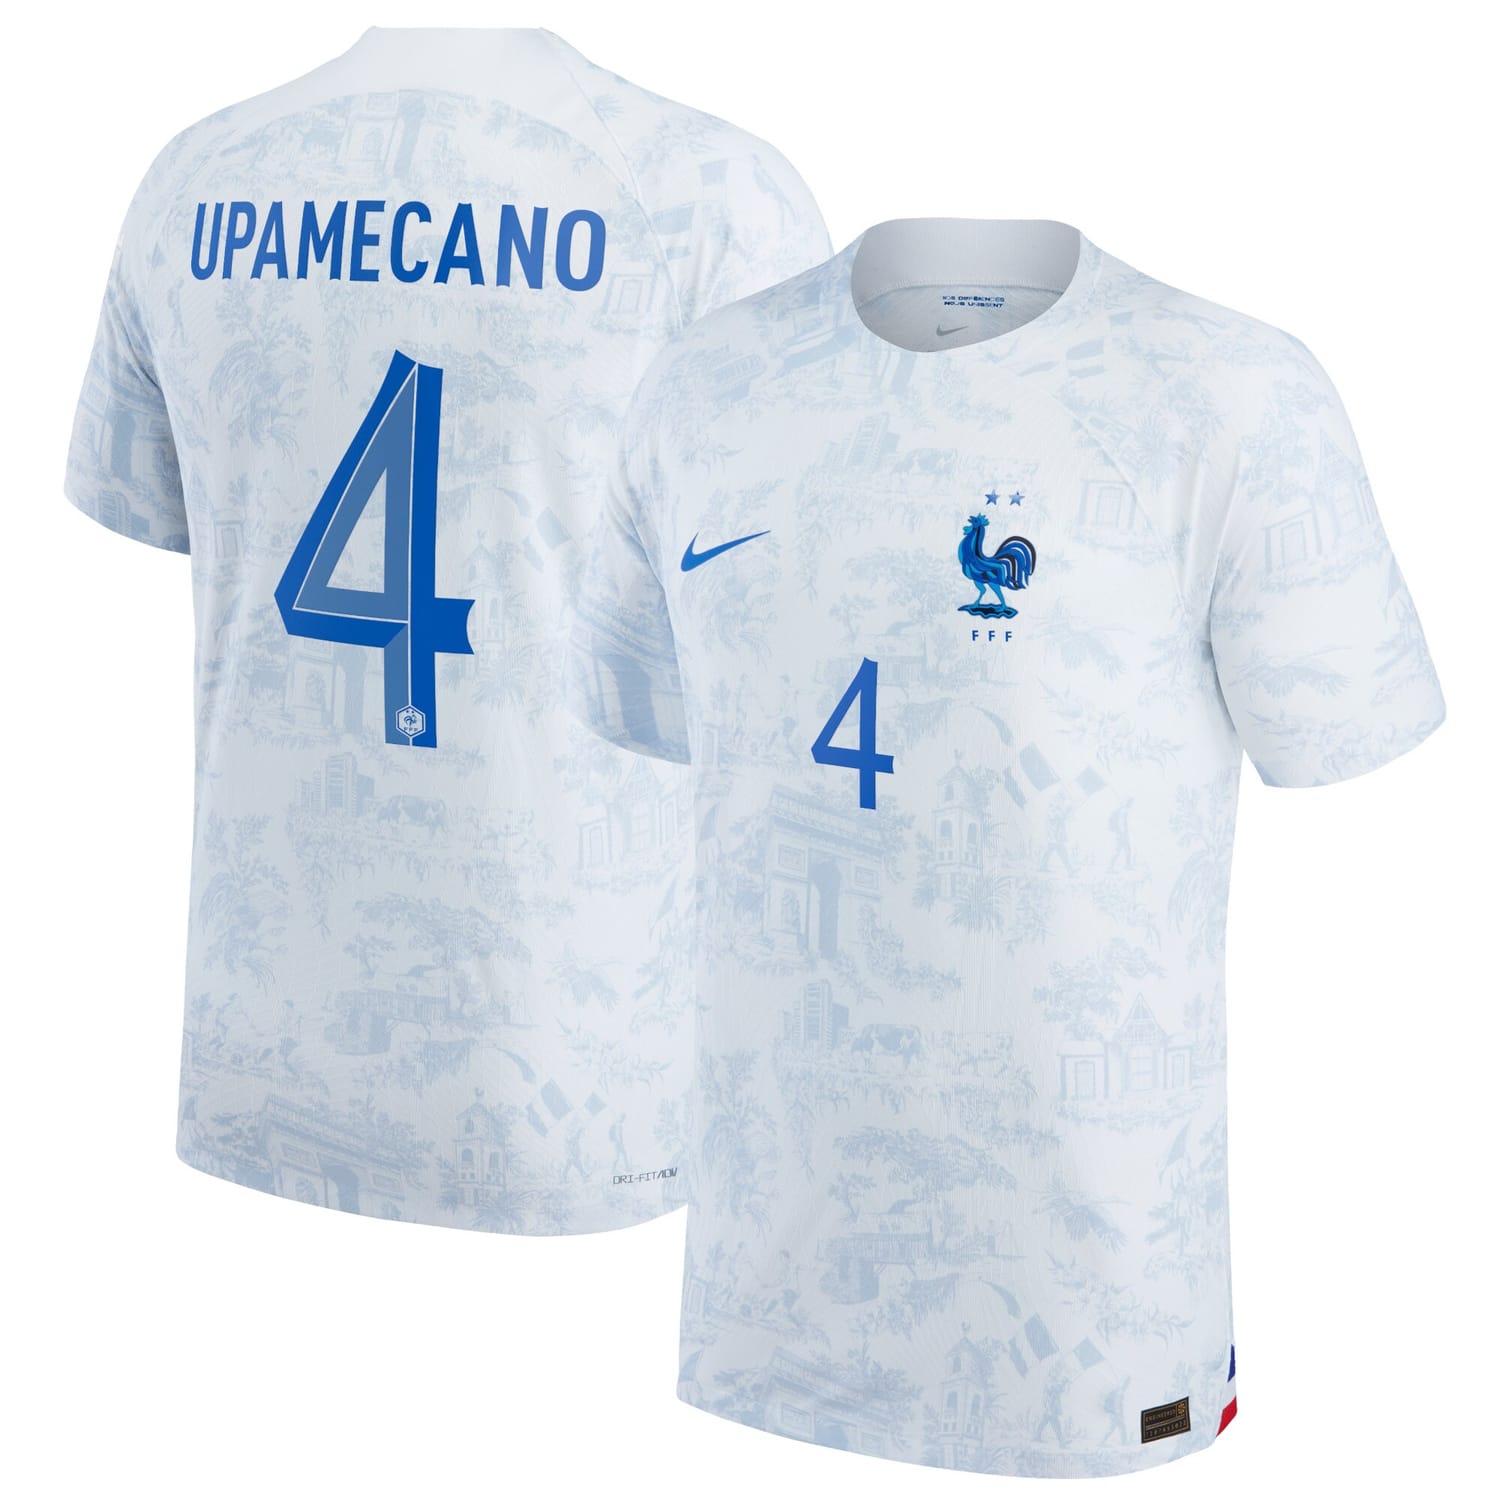 France National Team Away Authentic Jersey Shirt 2022 player Dayot Upamecano printing for Men